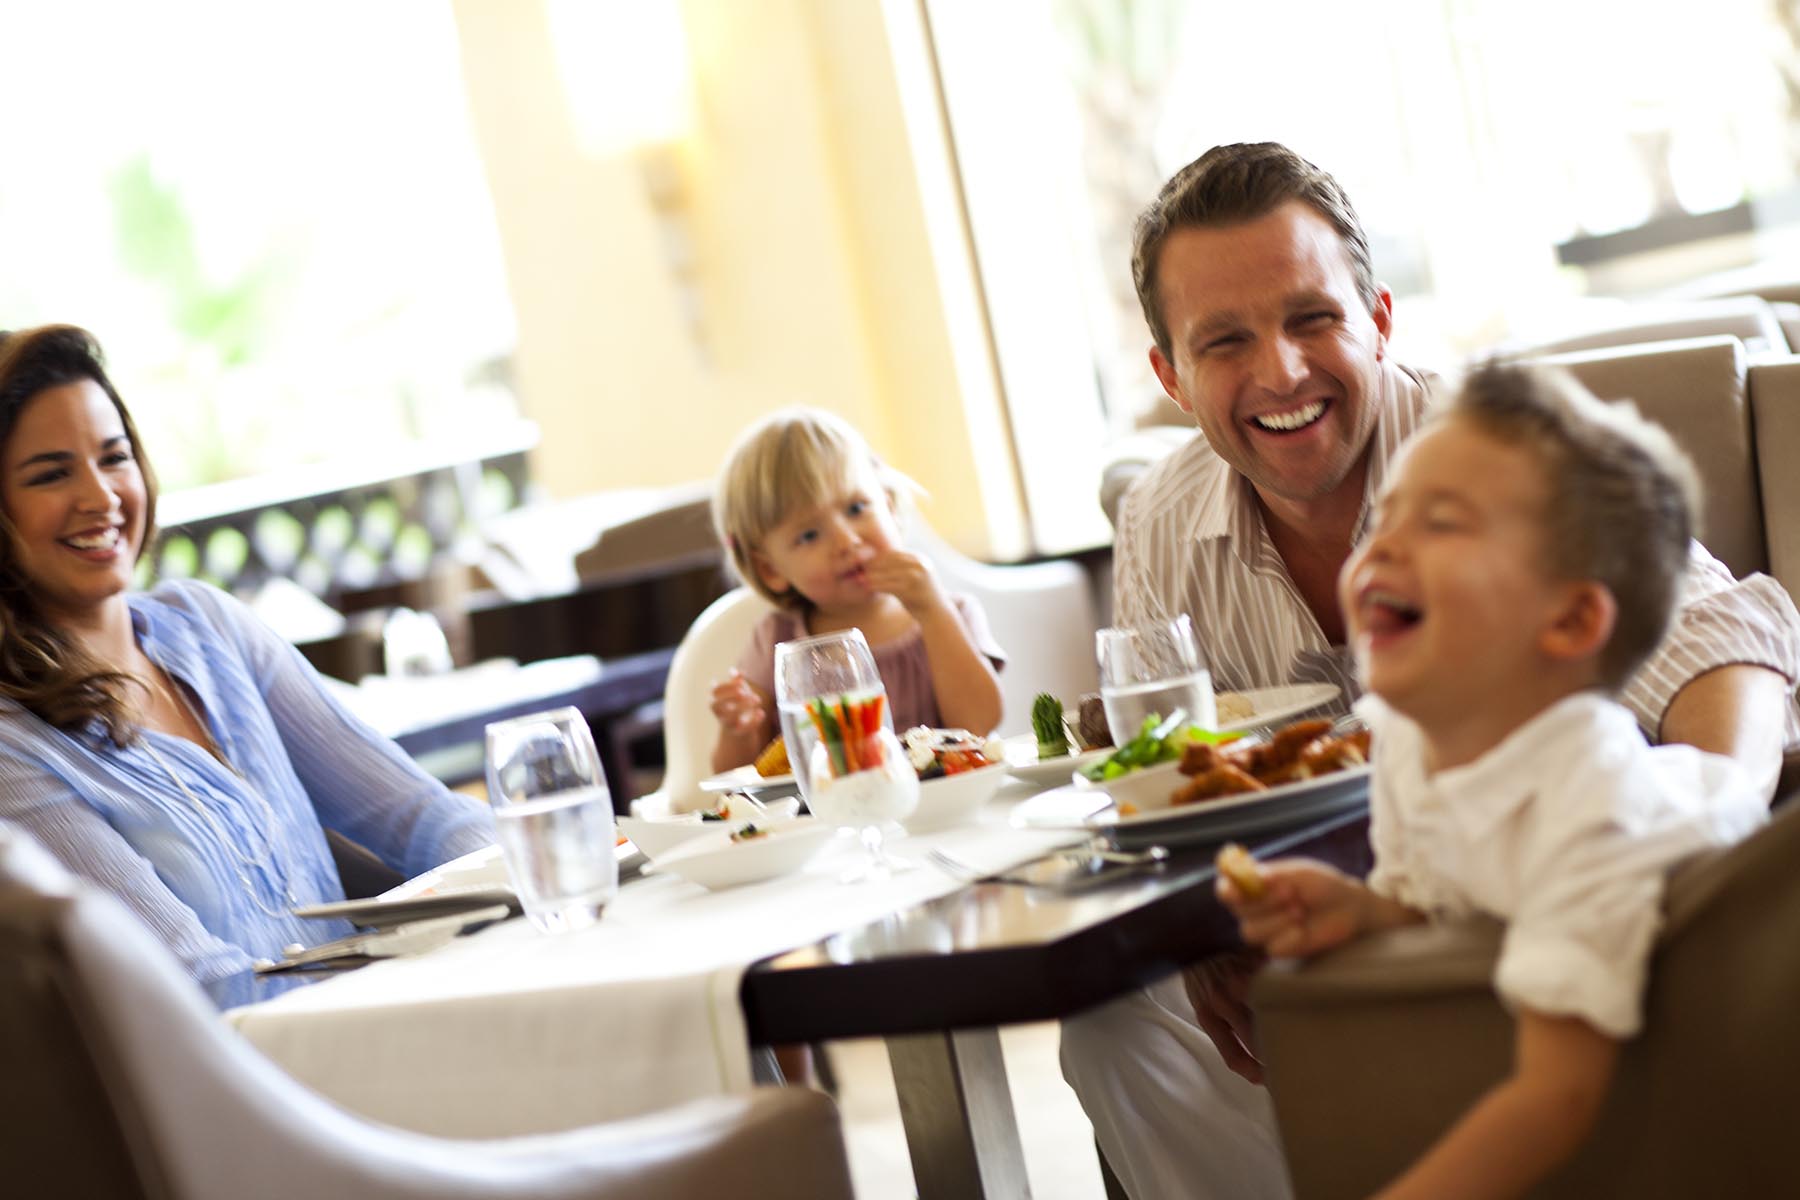 Over 50 Restaurants Where Your Kid Eats For Free